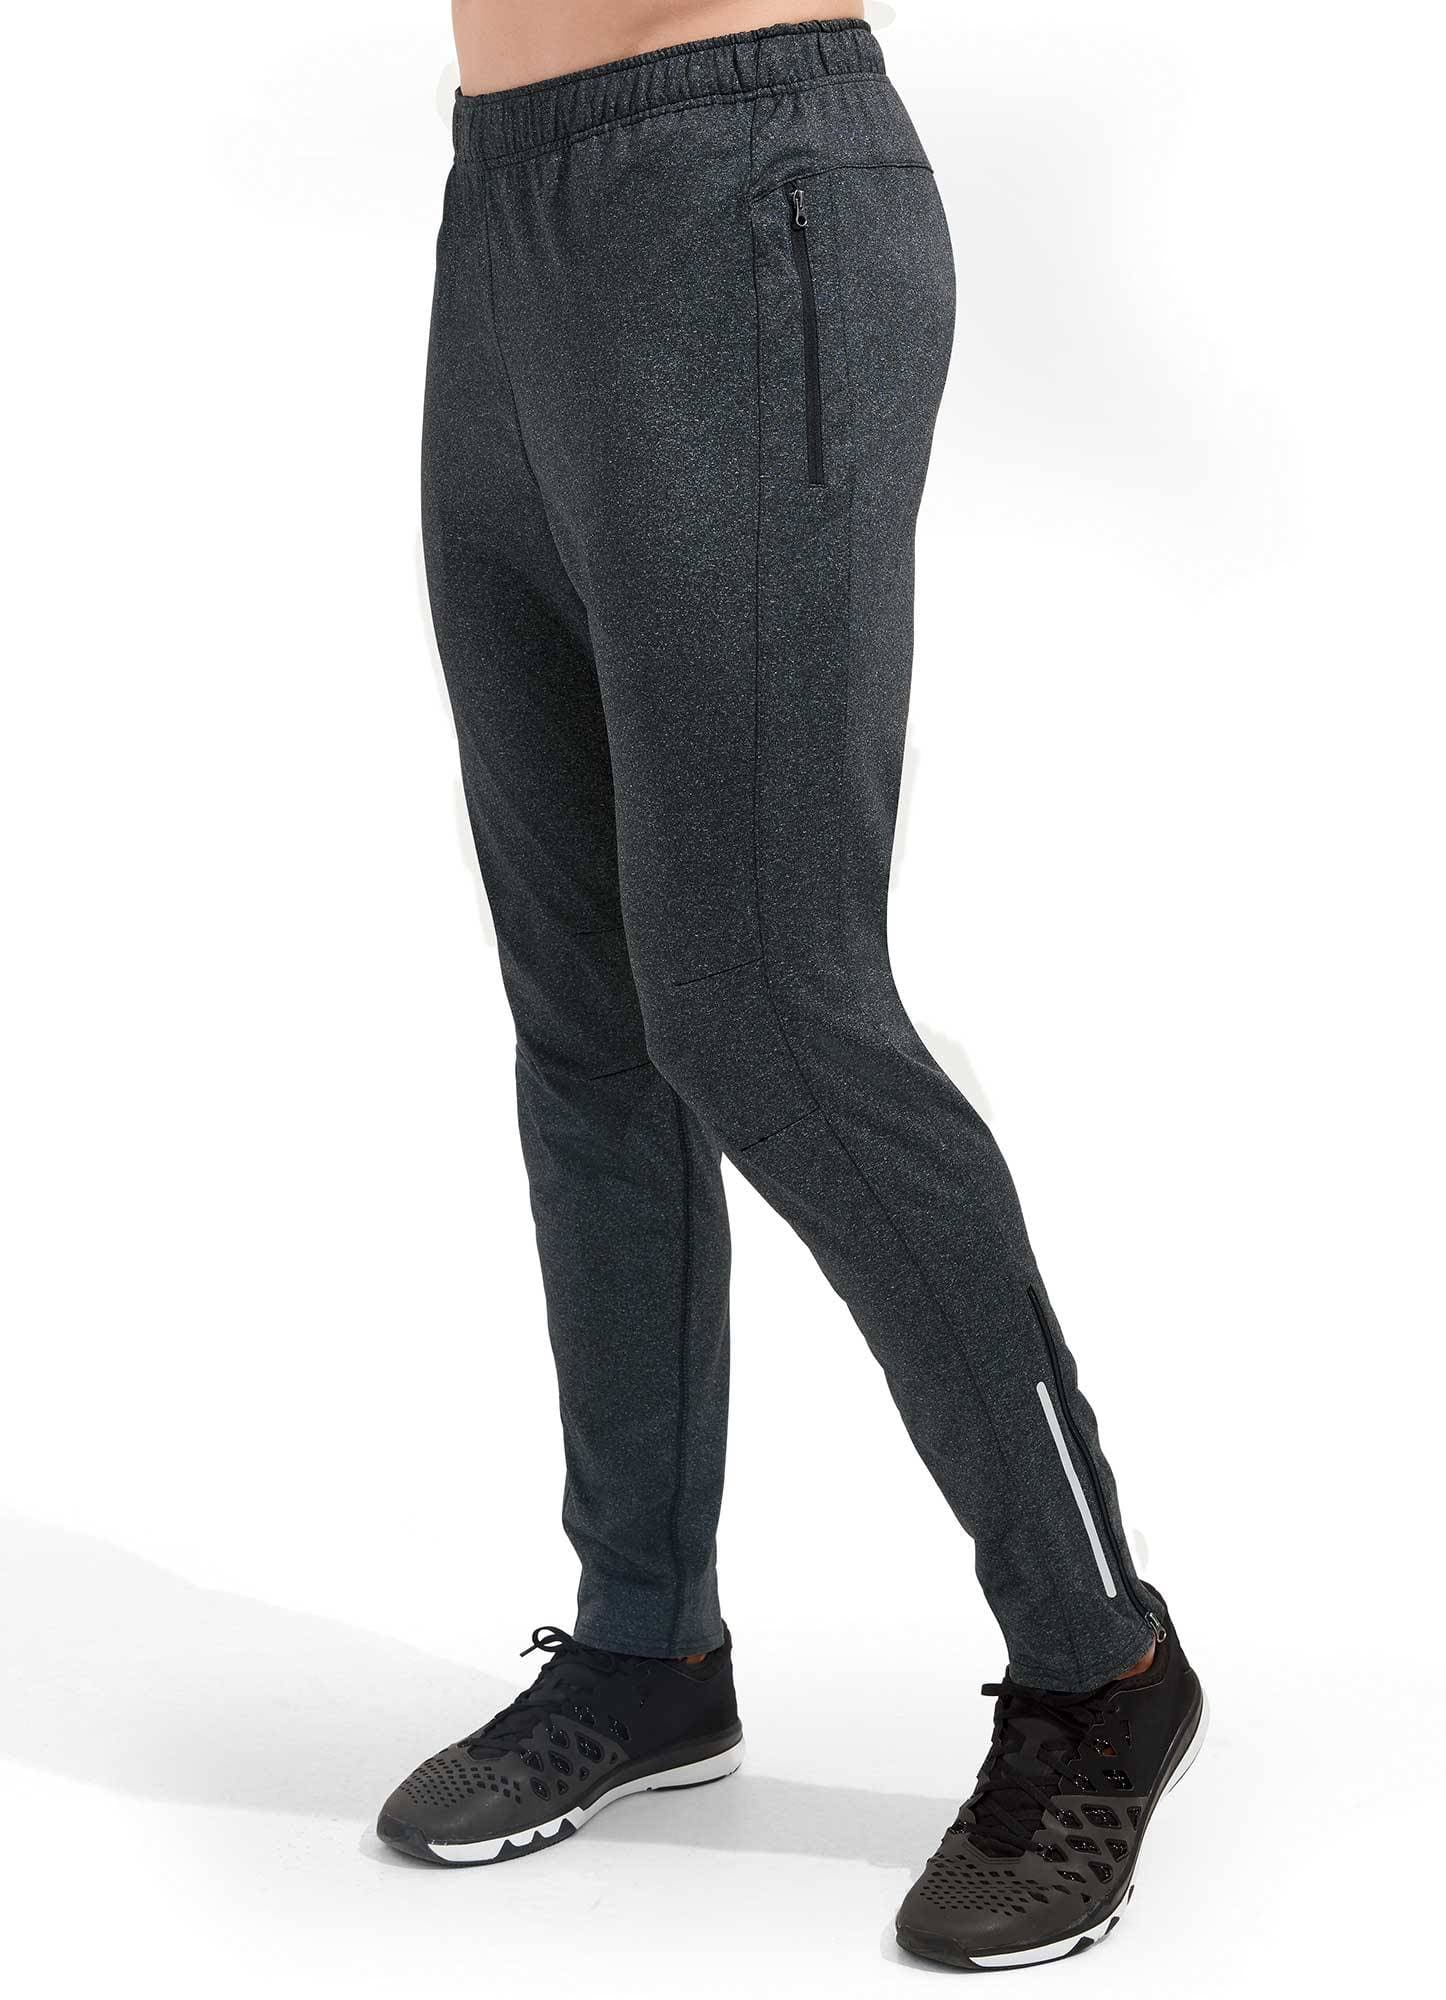 Jockey Rich Slim Fit Joggers with Zipper Pockets #AM02 Charcoal Melange ::  PANERI EMBROIDERY